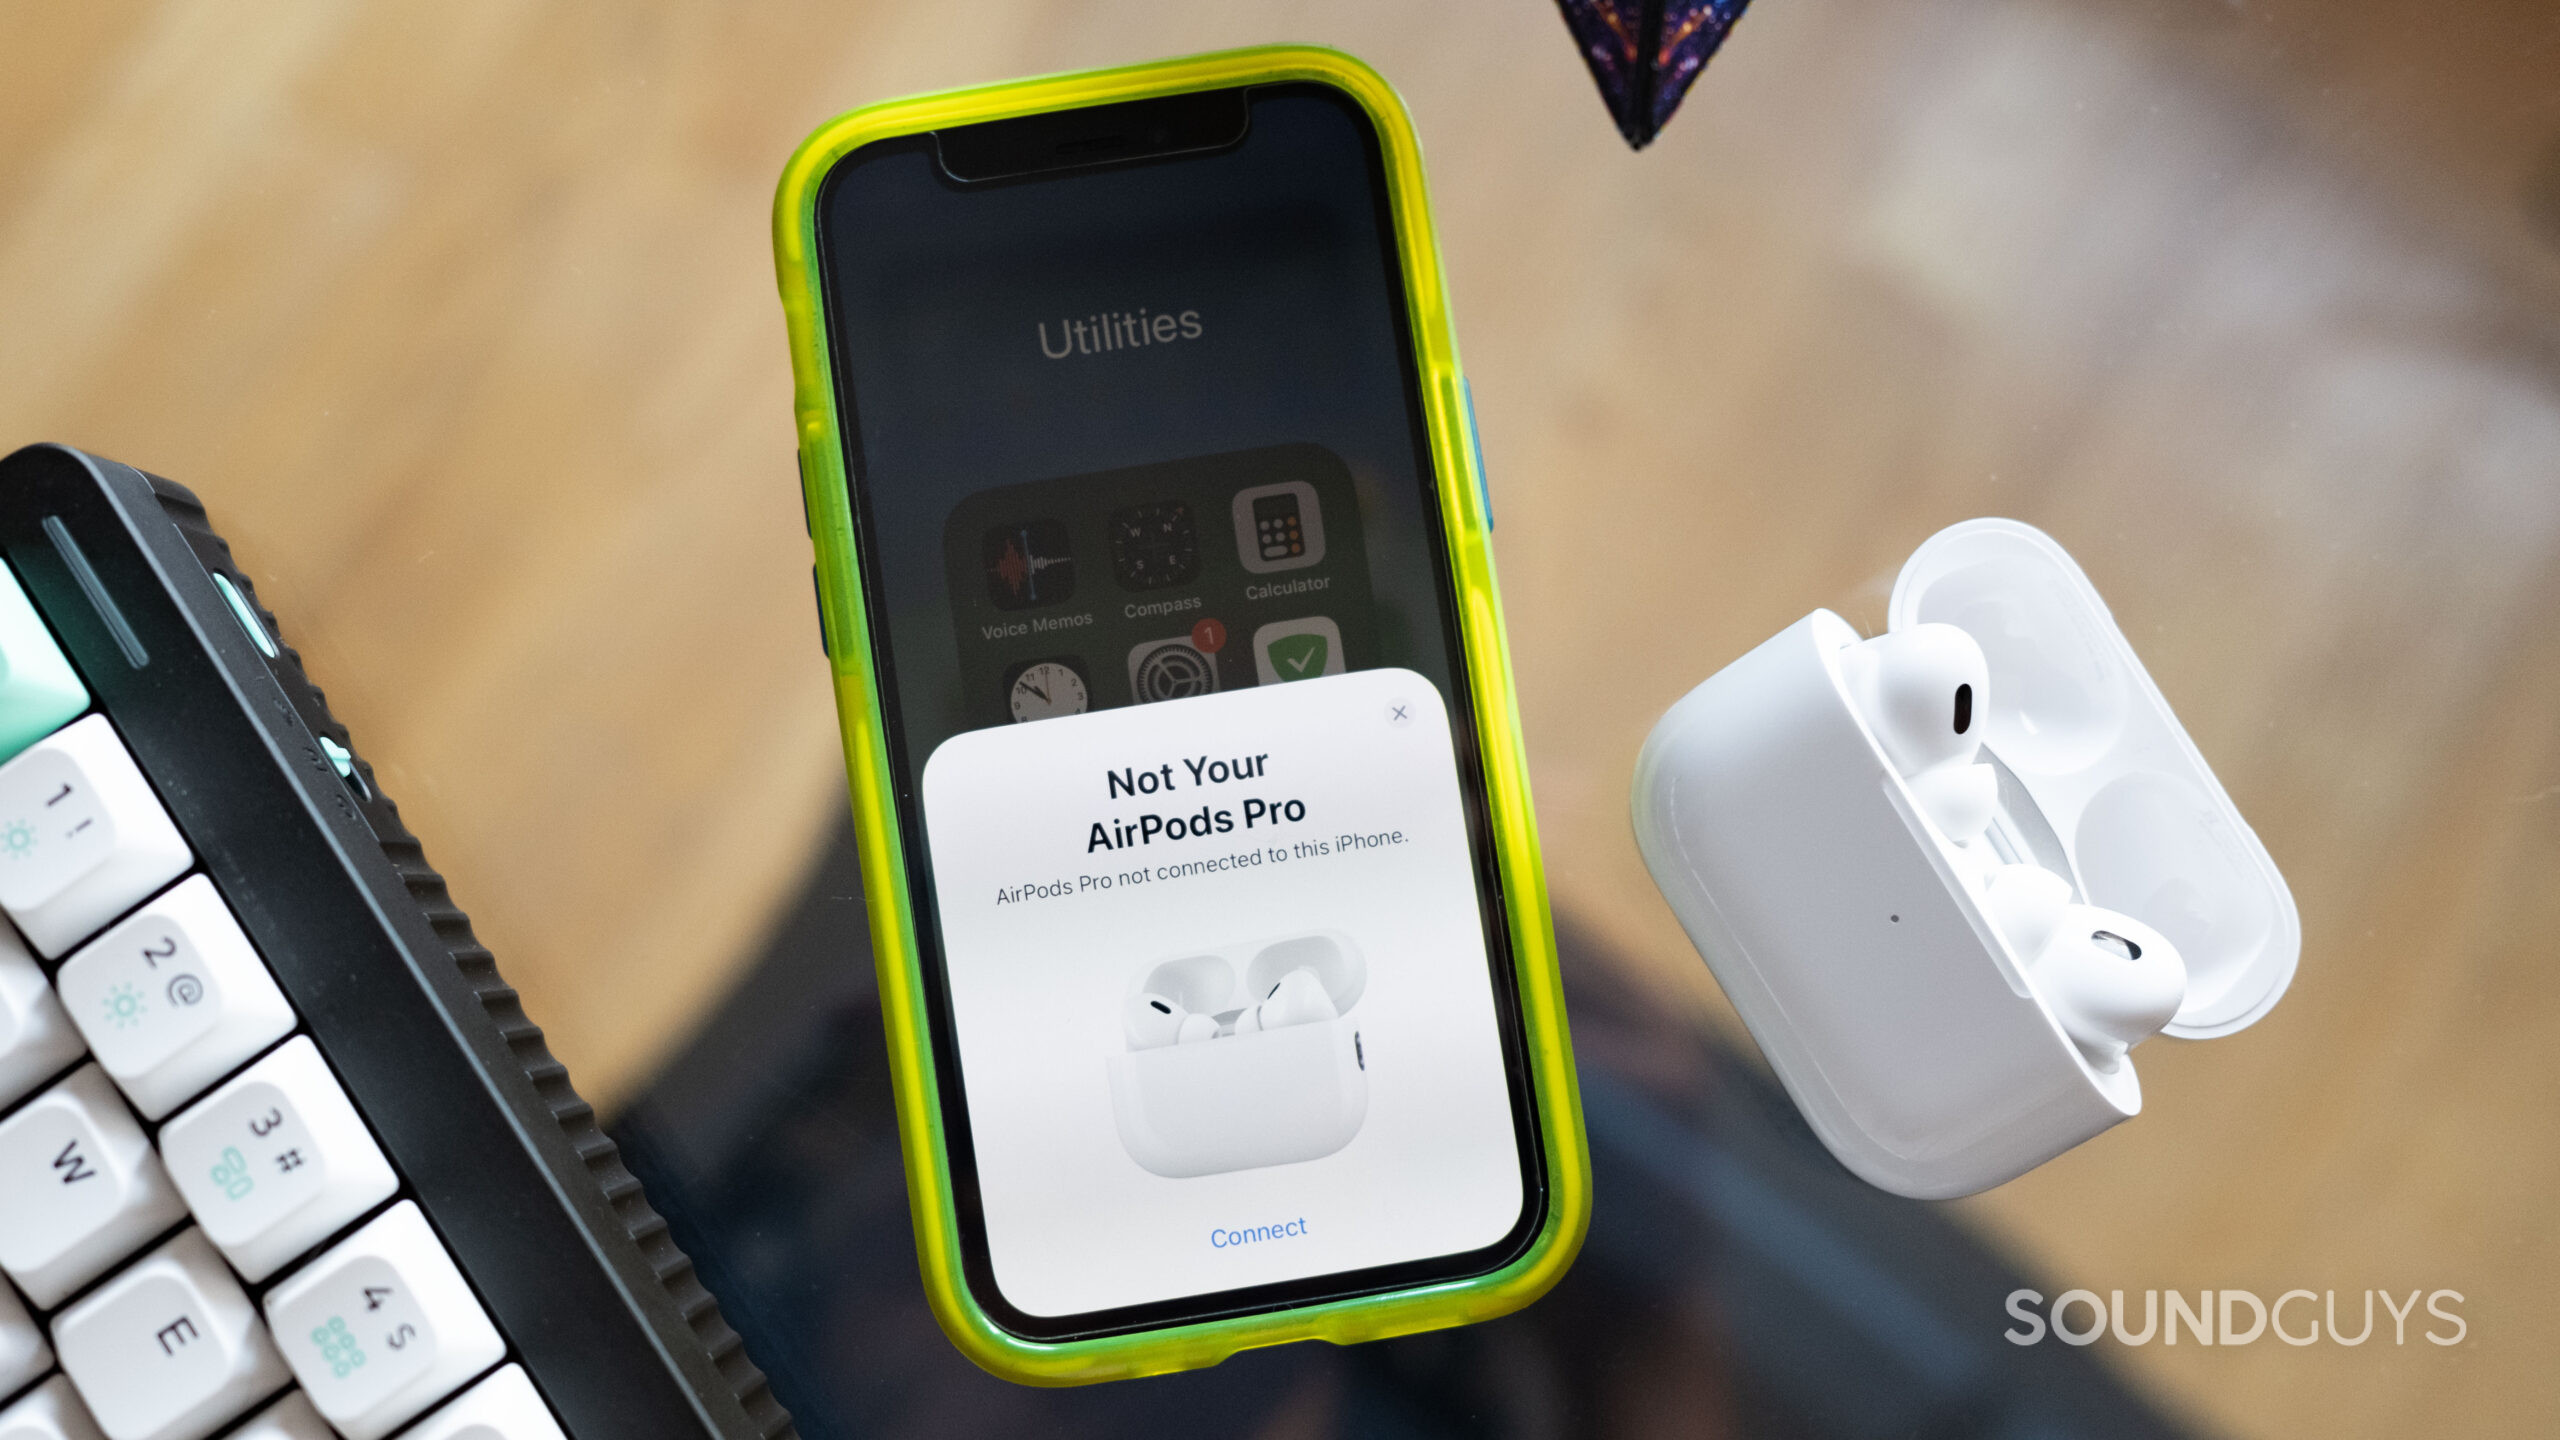 The AirPods Pro 2 and an iPhone 12 mini in pairing mode.